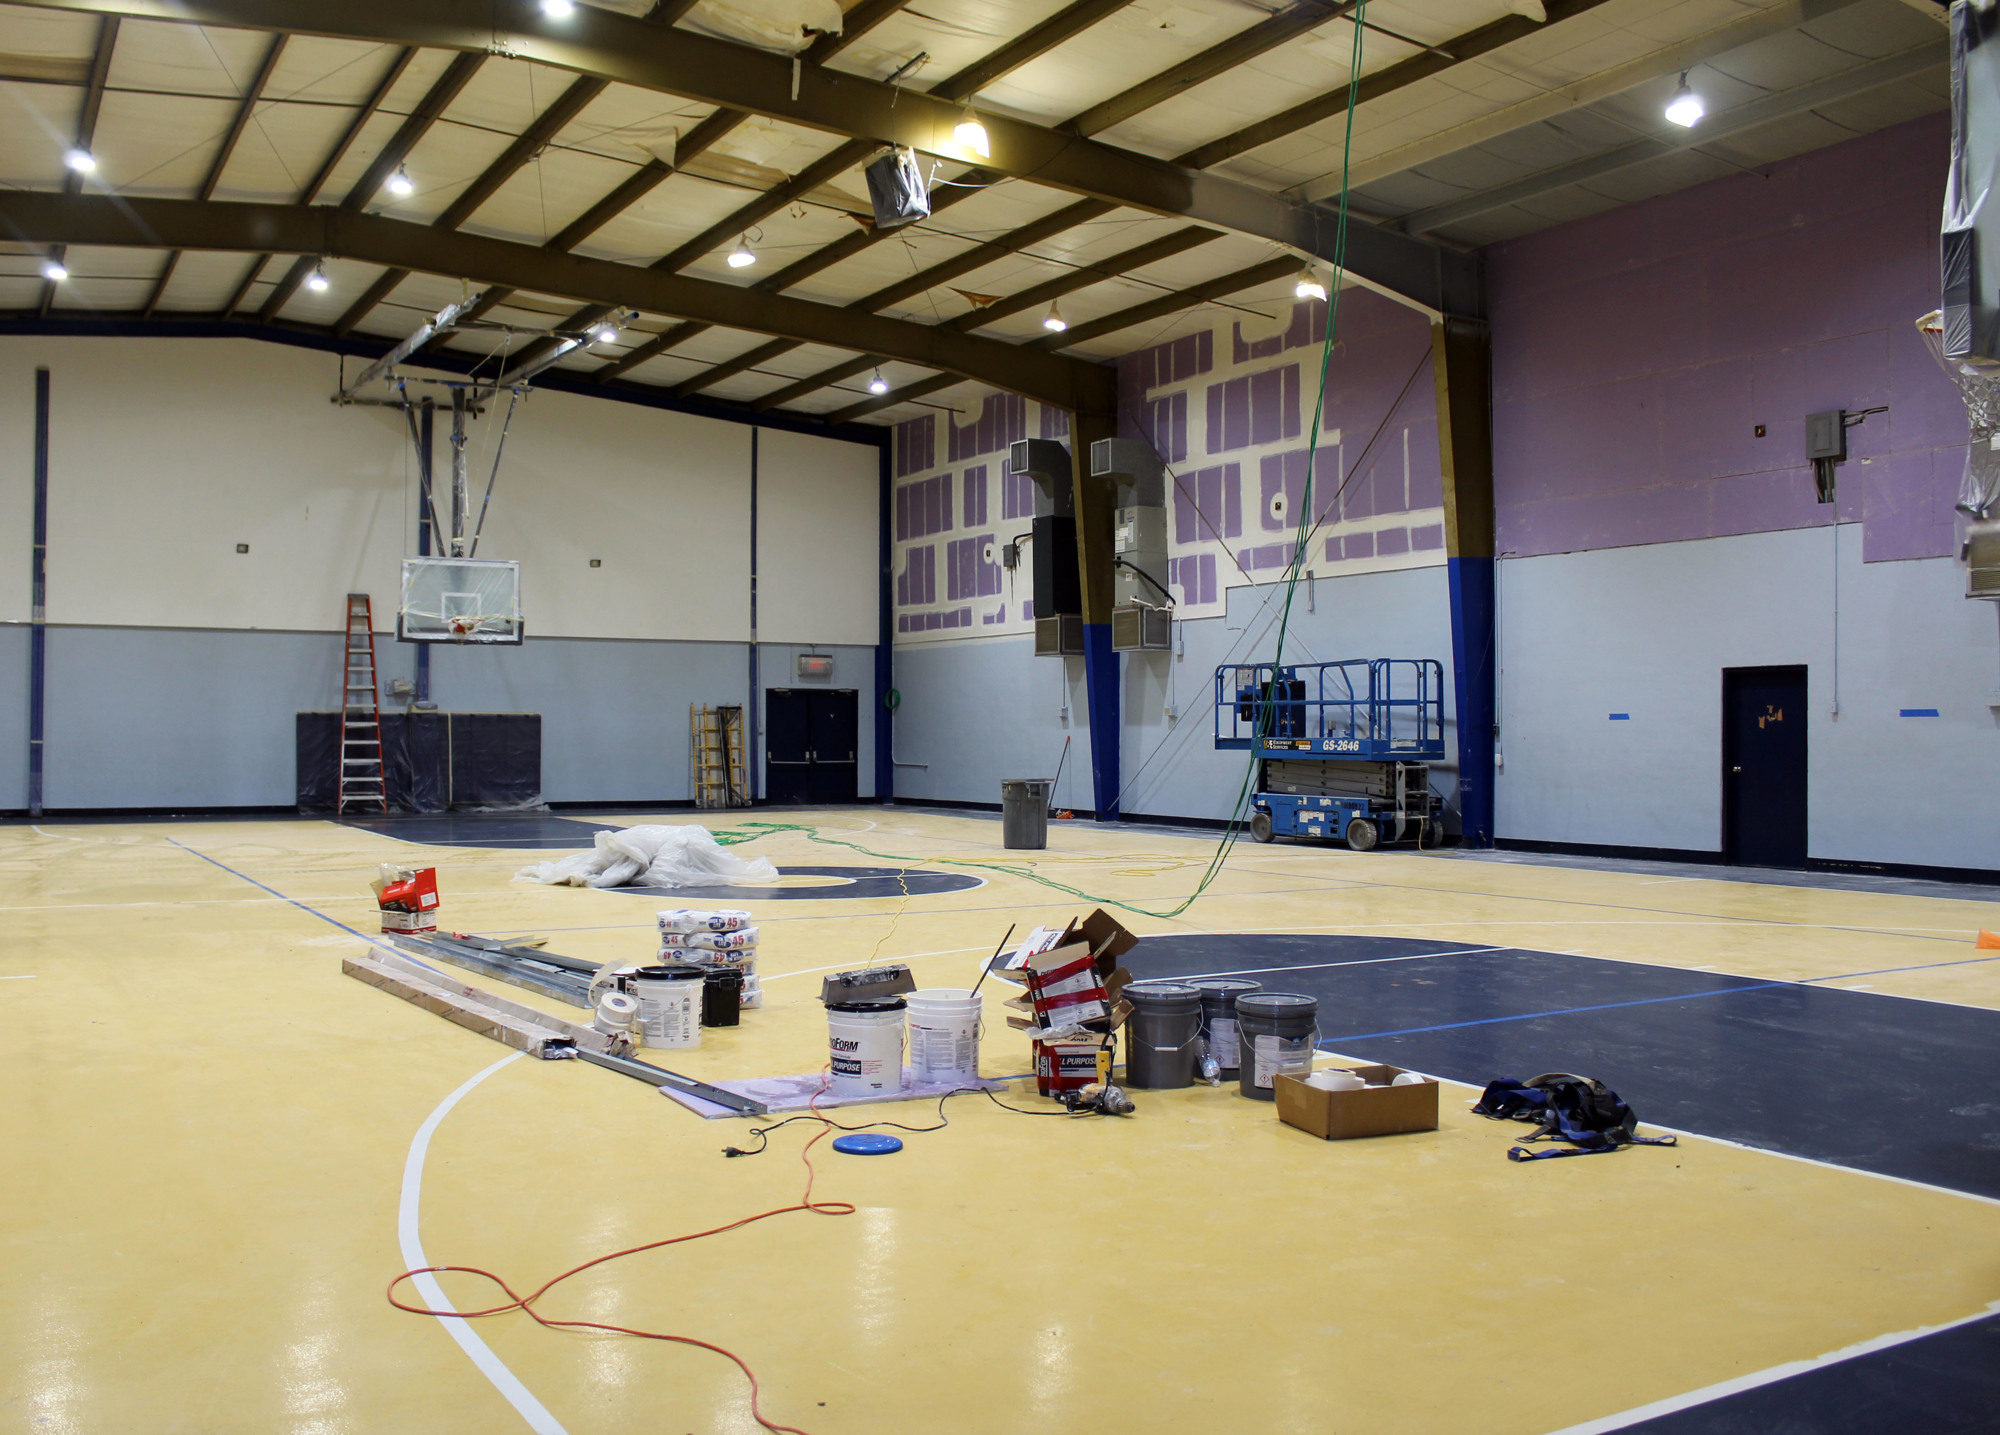 The new campus will feature a gym, which the current campus does not have.